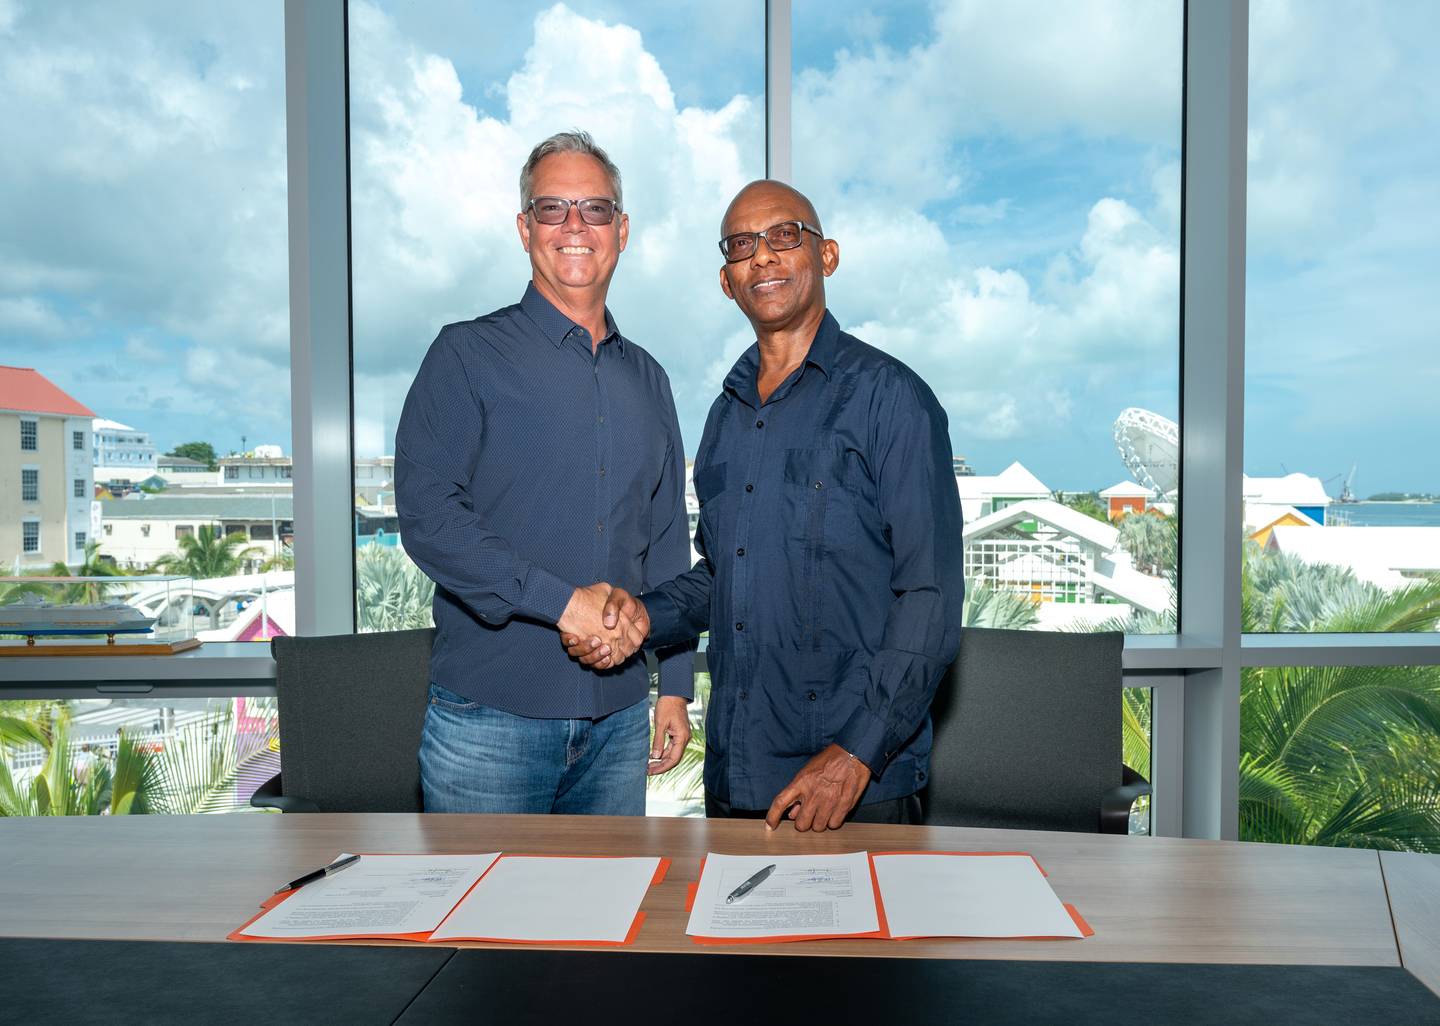 Nassau Cruise Port and Ministry of Disaster Risk Management Sign MOU to Strengthen Partnership for Natural Disaster Relief